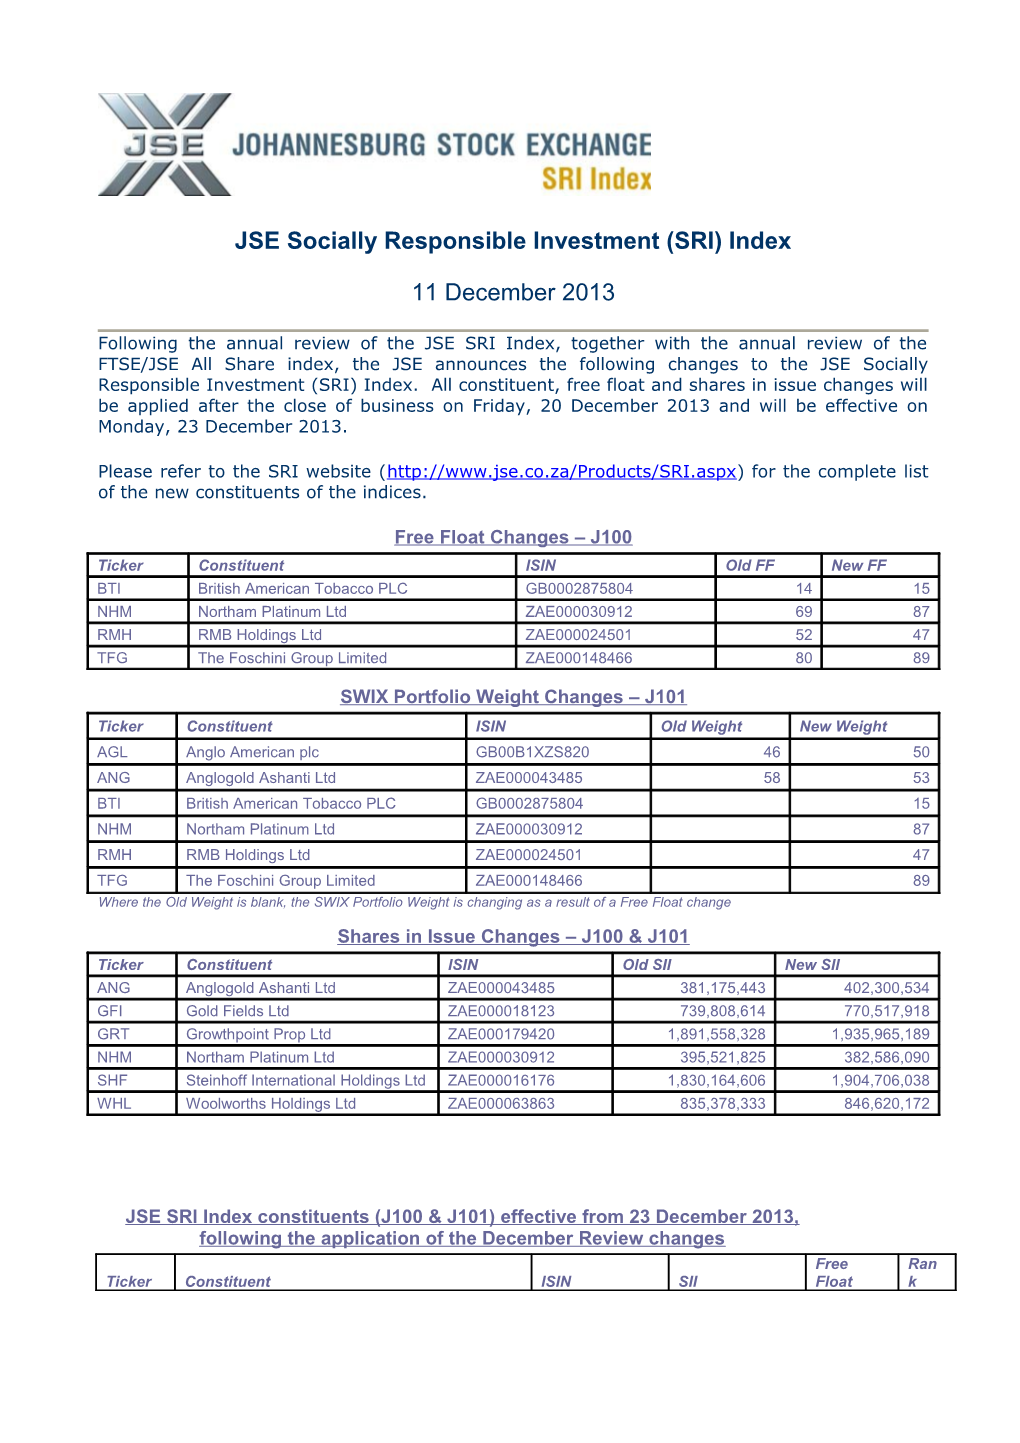 20131223 SRI Changes Due to FTSEJSE December Review